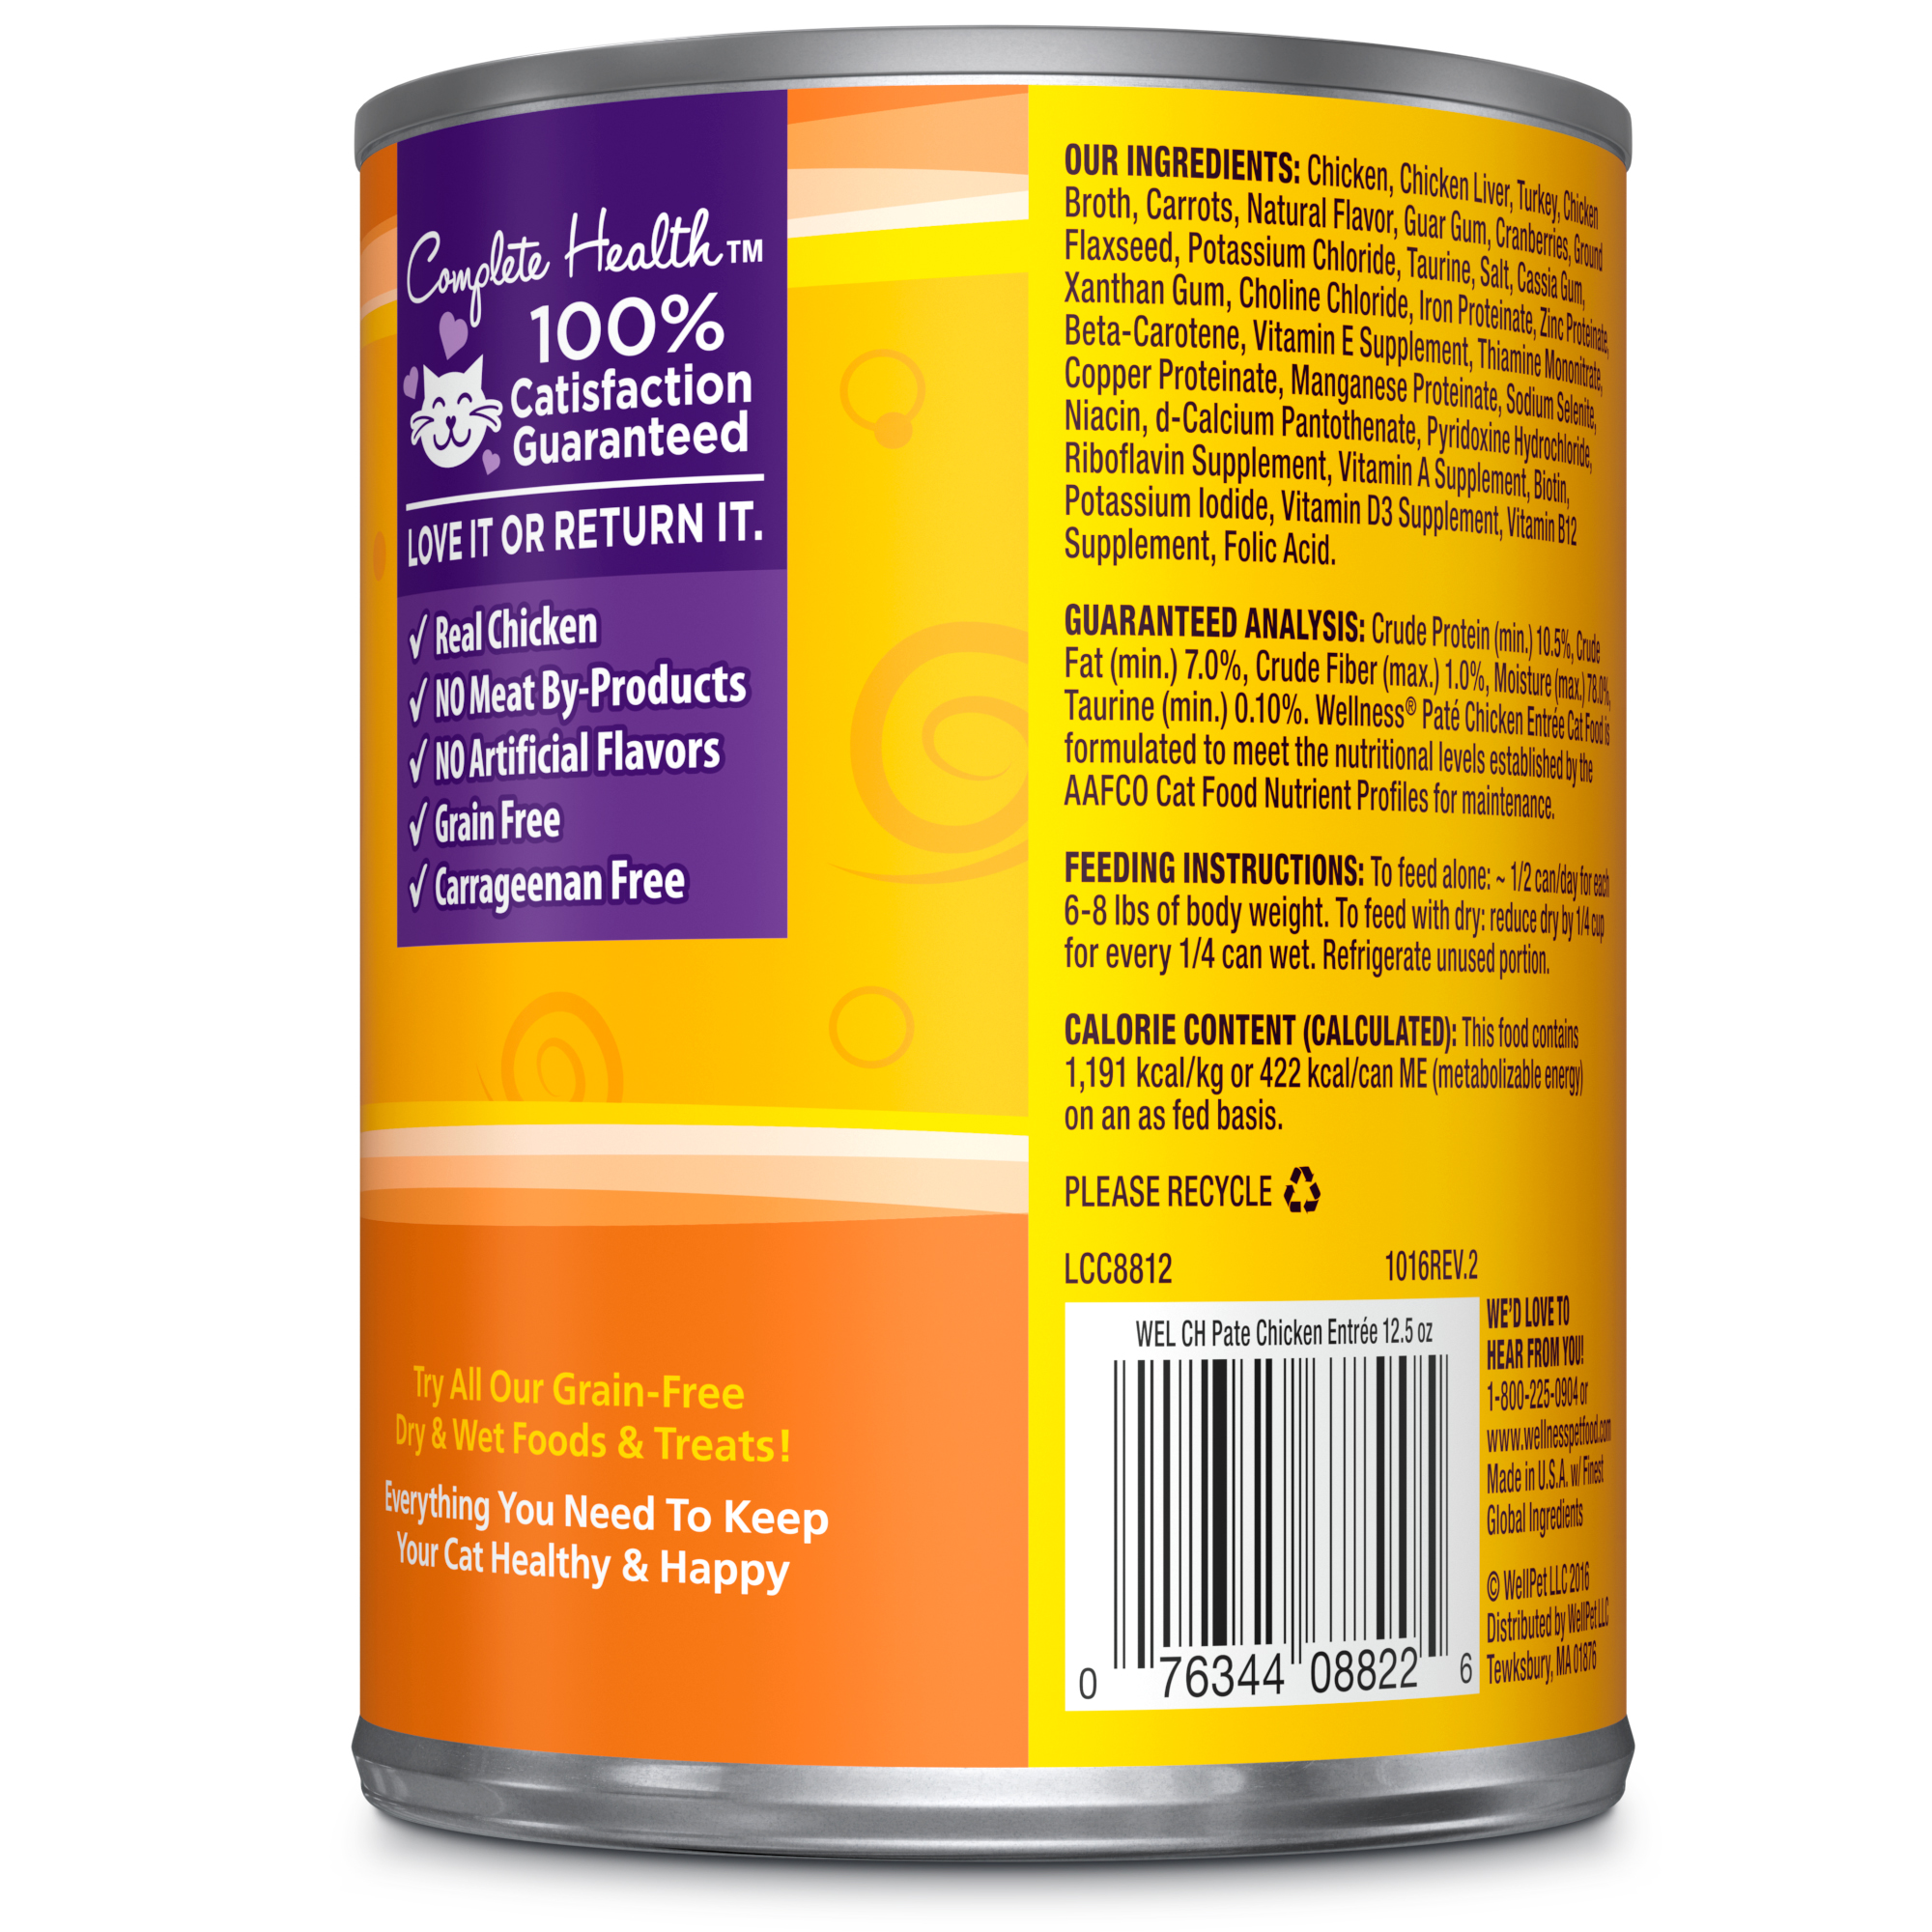 Wellness Complete Health Grain Free Canned Cat Food, Chicken Pate, 12.5 Ounces (Pack of 12) - image 2 of 8